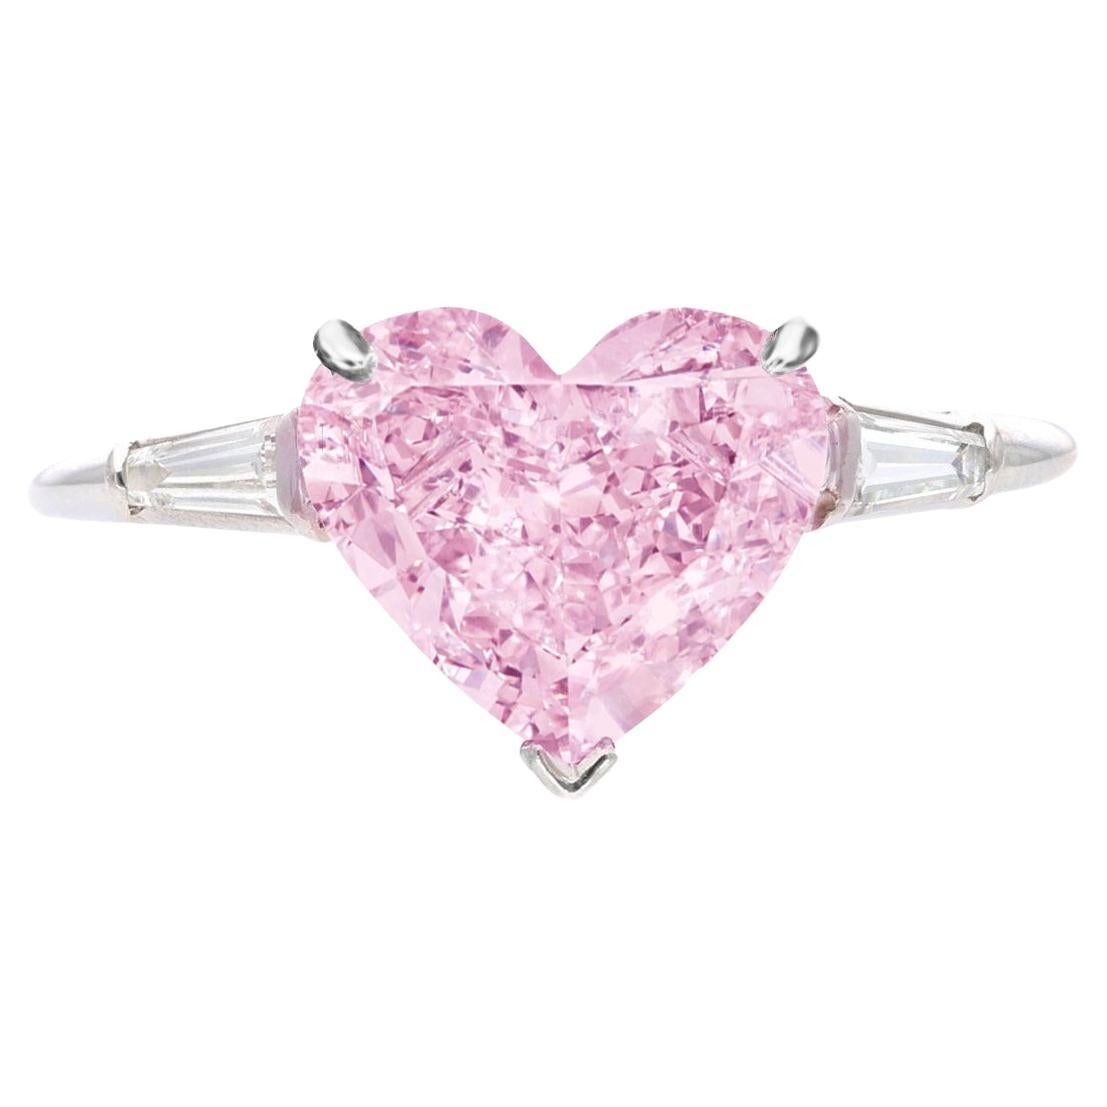 In the realm of exquisite jewels, few gems can rival the allure and rarity of a 2.2 carat heart-shaped Fancy Intense Pink Diamond ring with flawless clarity. This magnificent piece stands as a testament to the breathtaking beauty that nature can